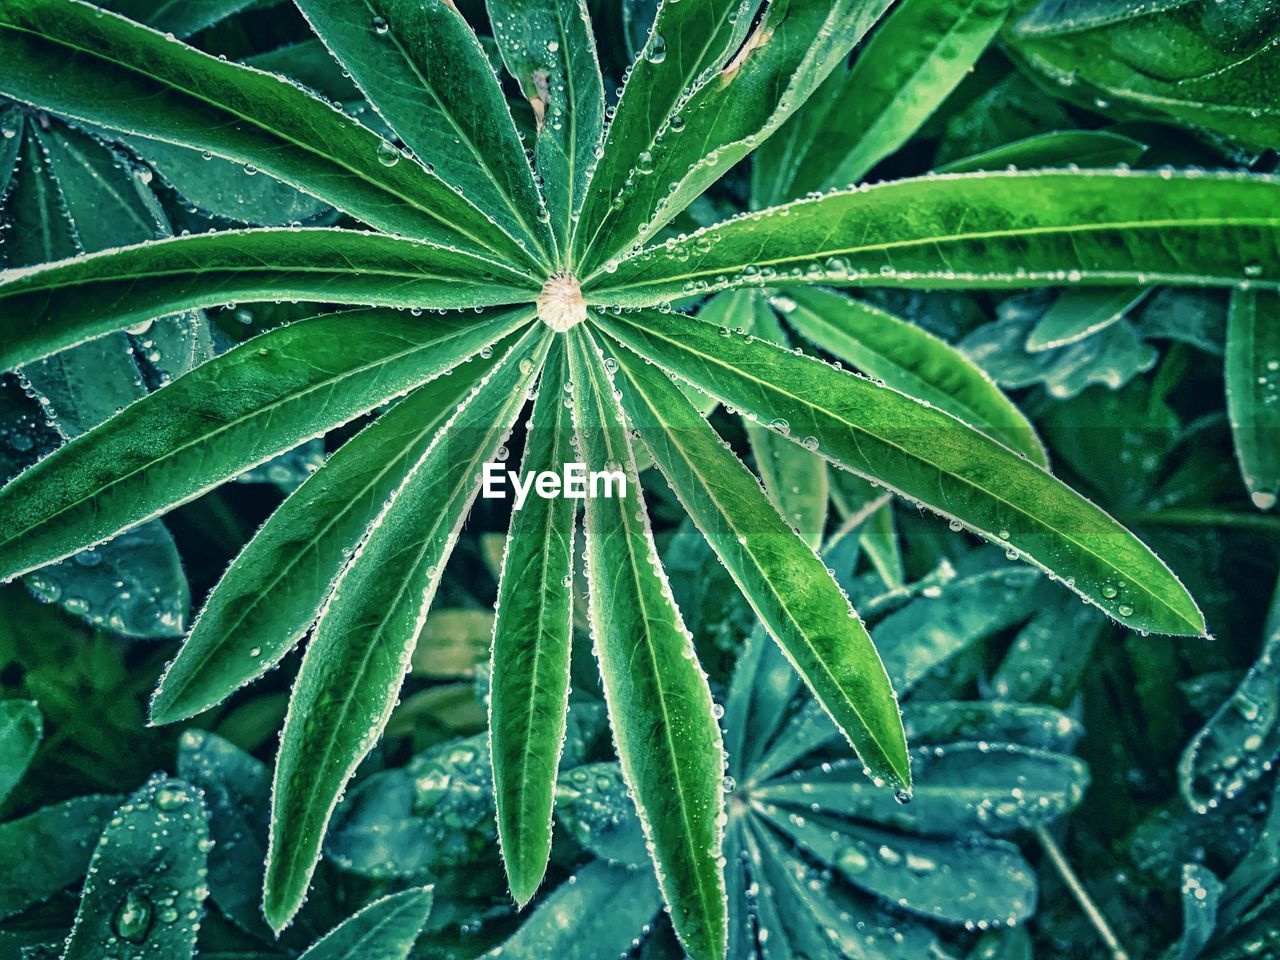 High angle view of wet plant leaves during rainy season